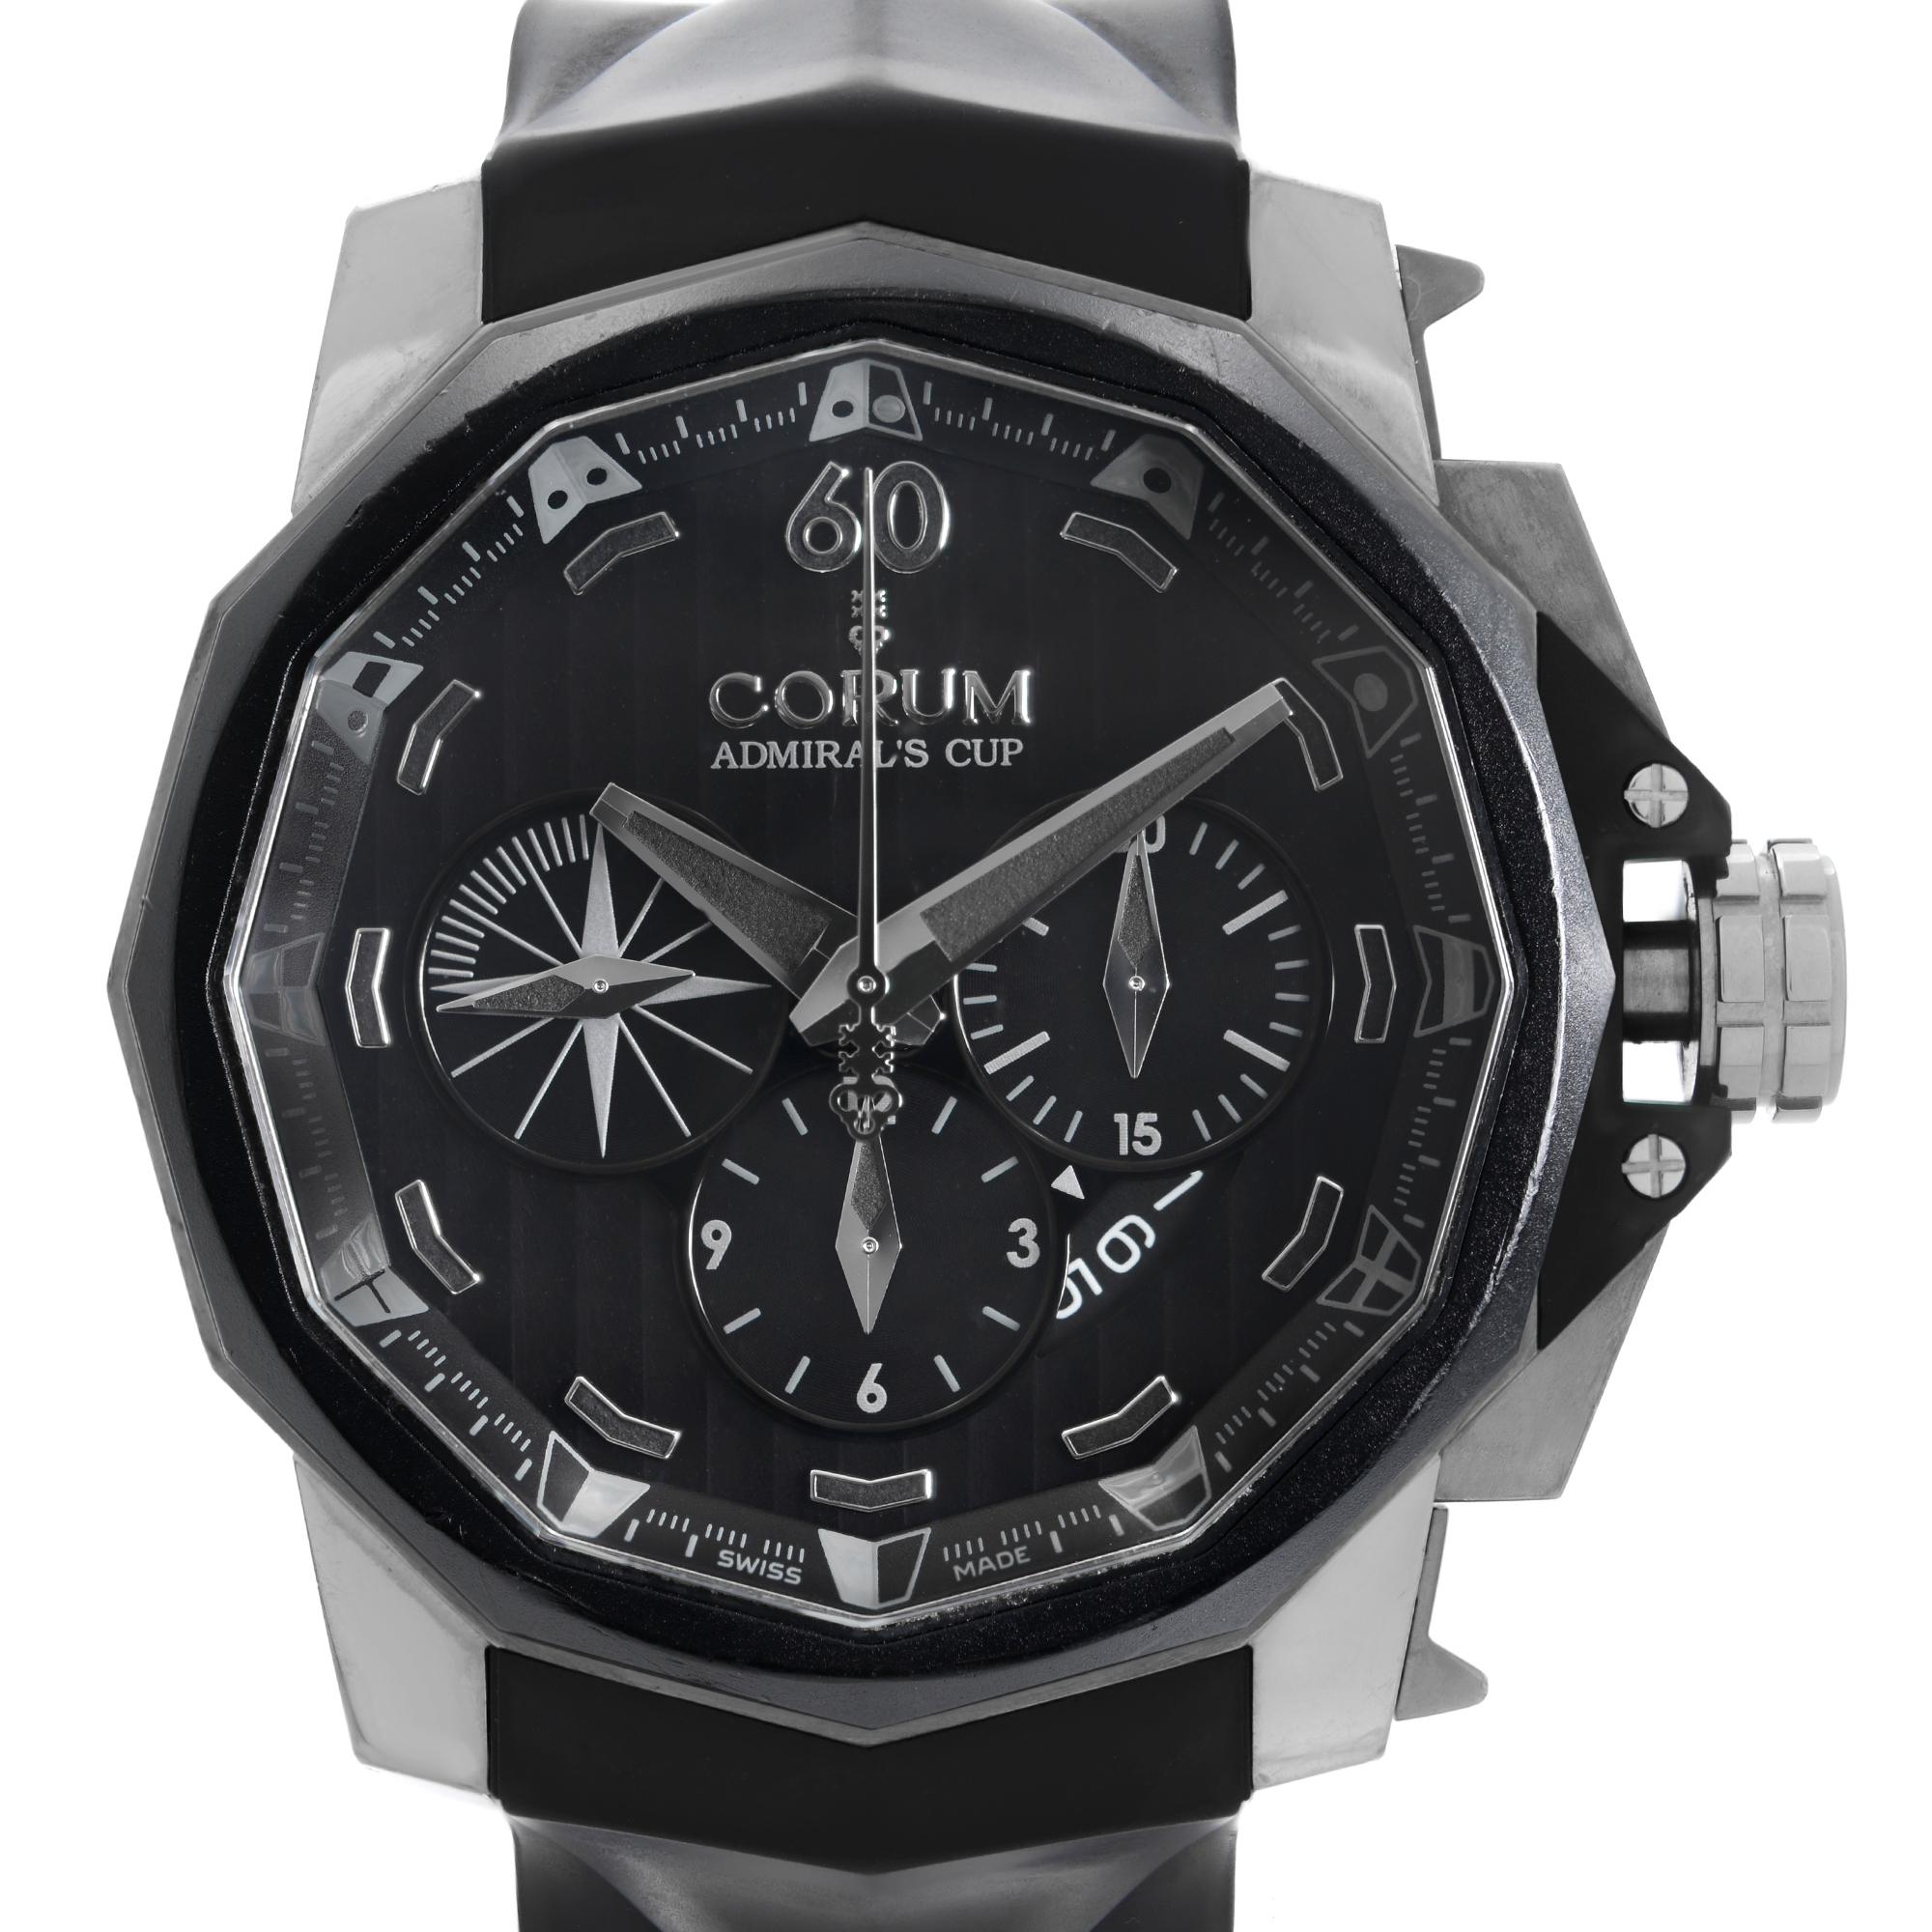 Limited Edition of  303 out of 750. Pre-owned Corum Admirals Cup 48mm Limited Edition Steel Automatic Watch 753.935.06/0371 AN52. Come with Original Papers, minor scratches, and Dings on Bezel.  Minor Wear on the Rubber Strap visible only Under